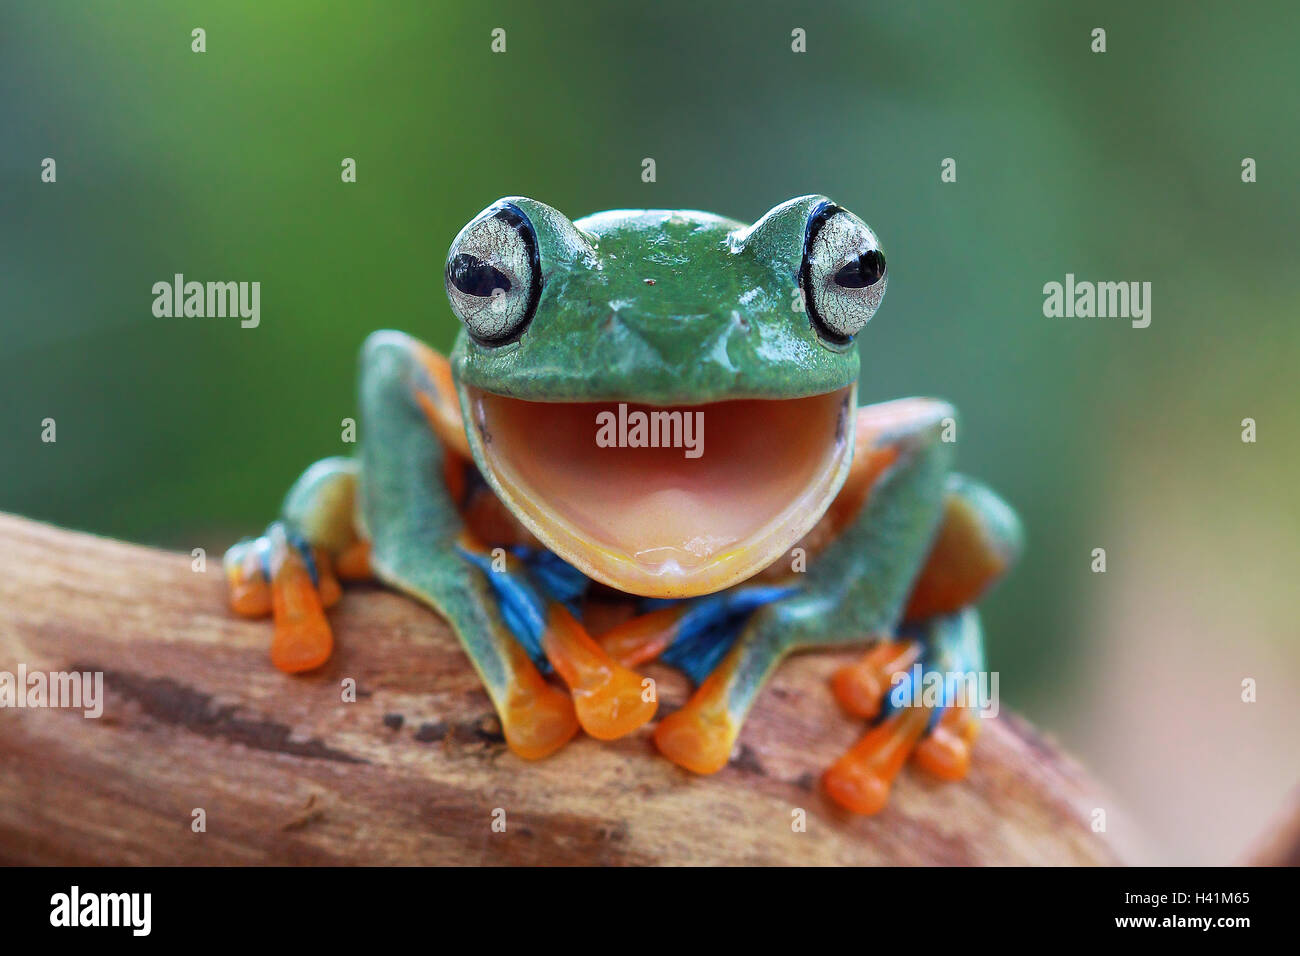 Portrait of a Javan gliding tree frog with mouth open, Indonesia Stock Photo